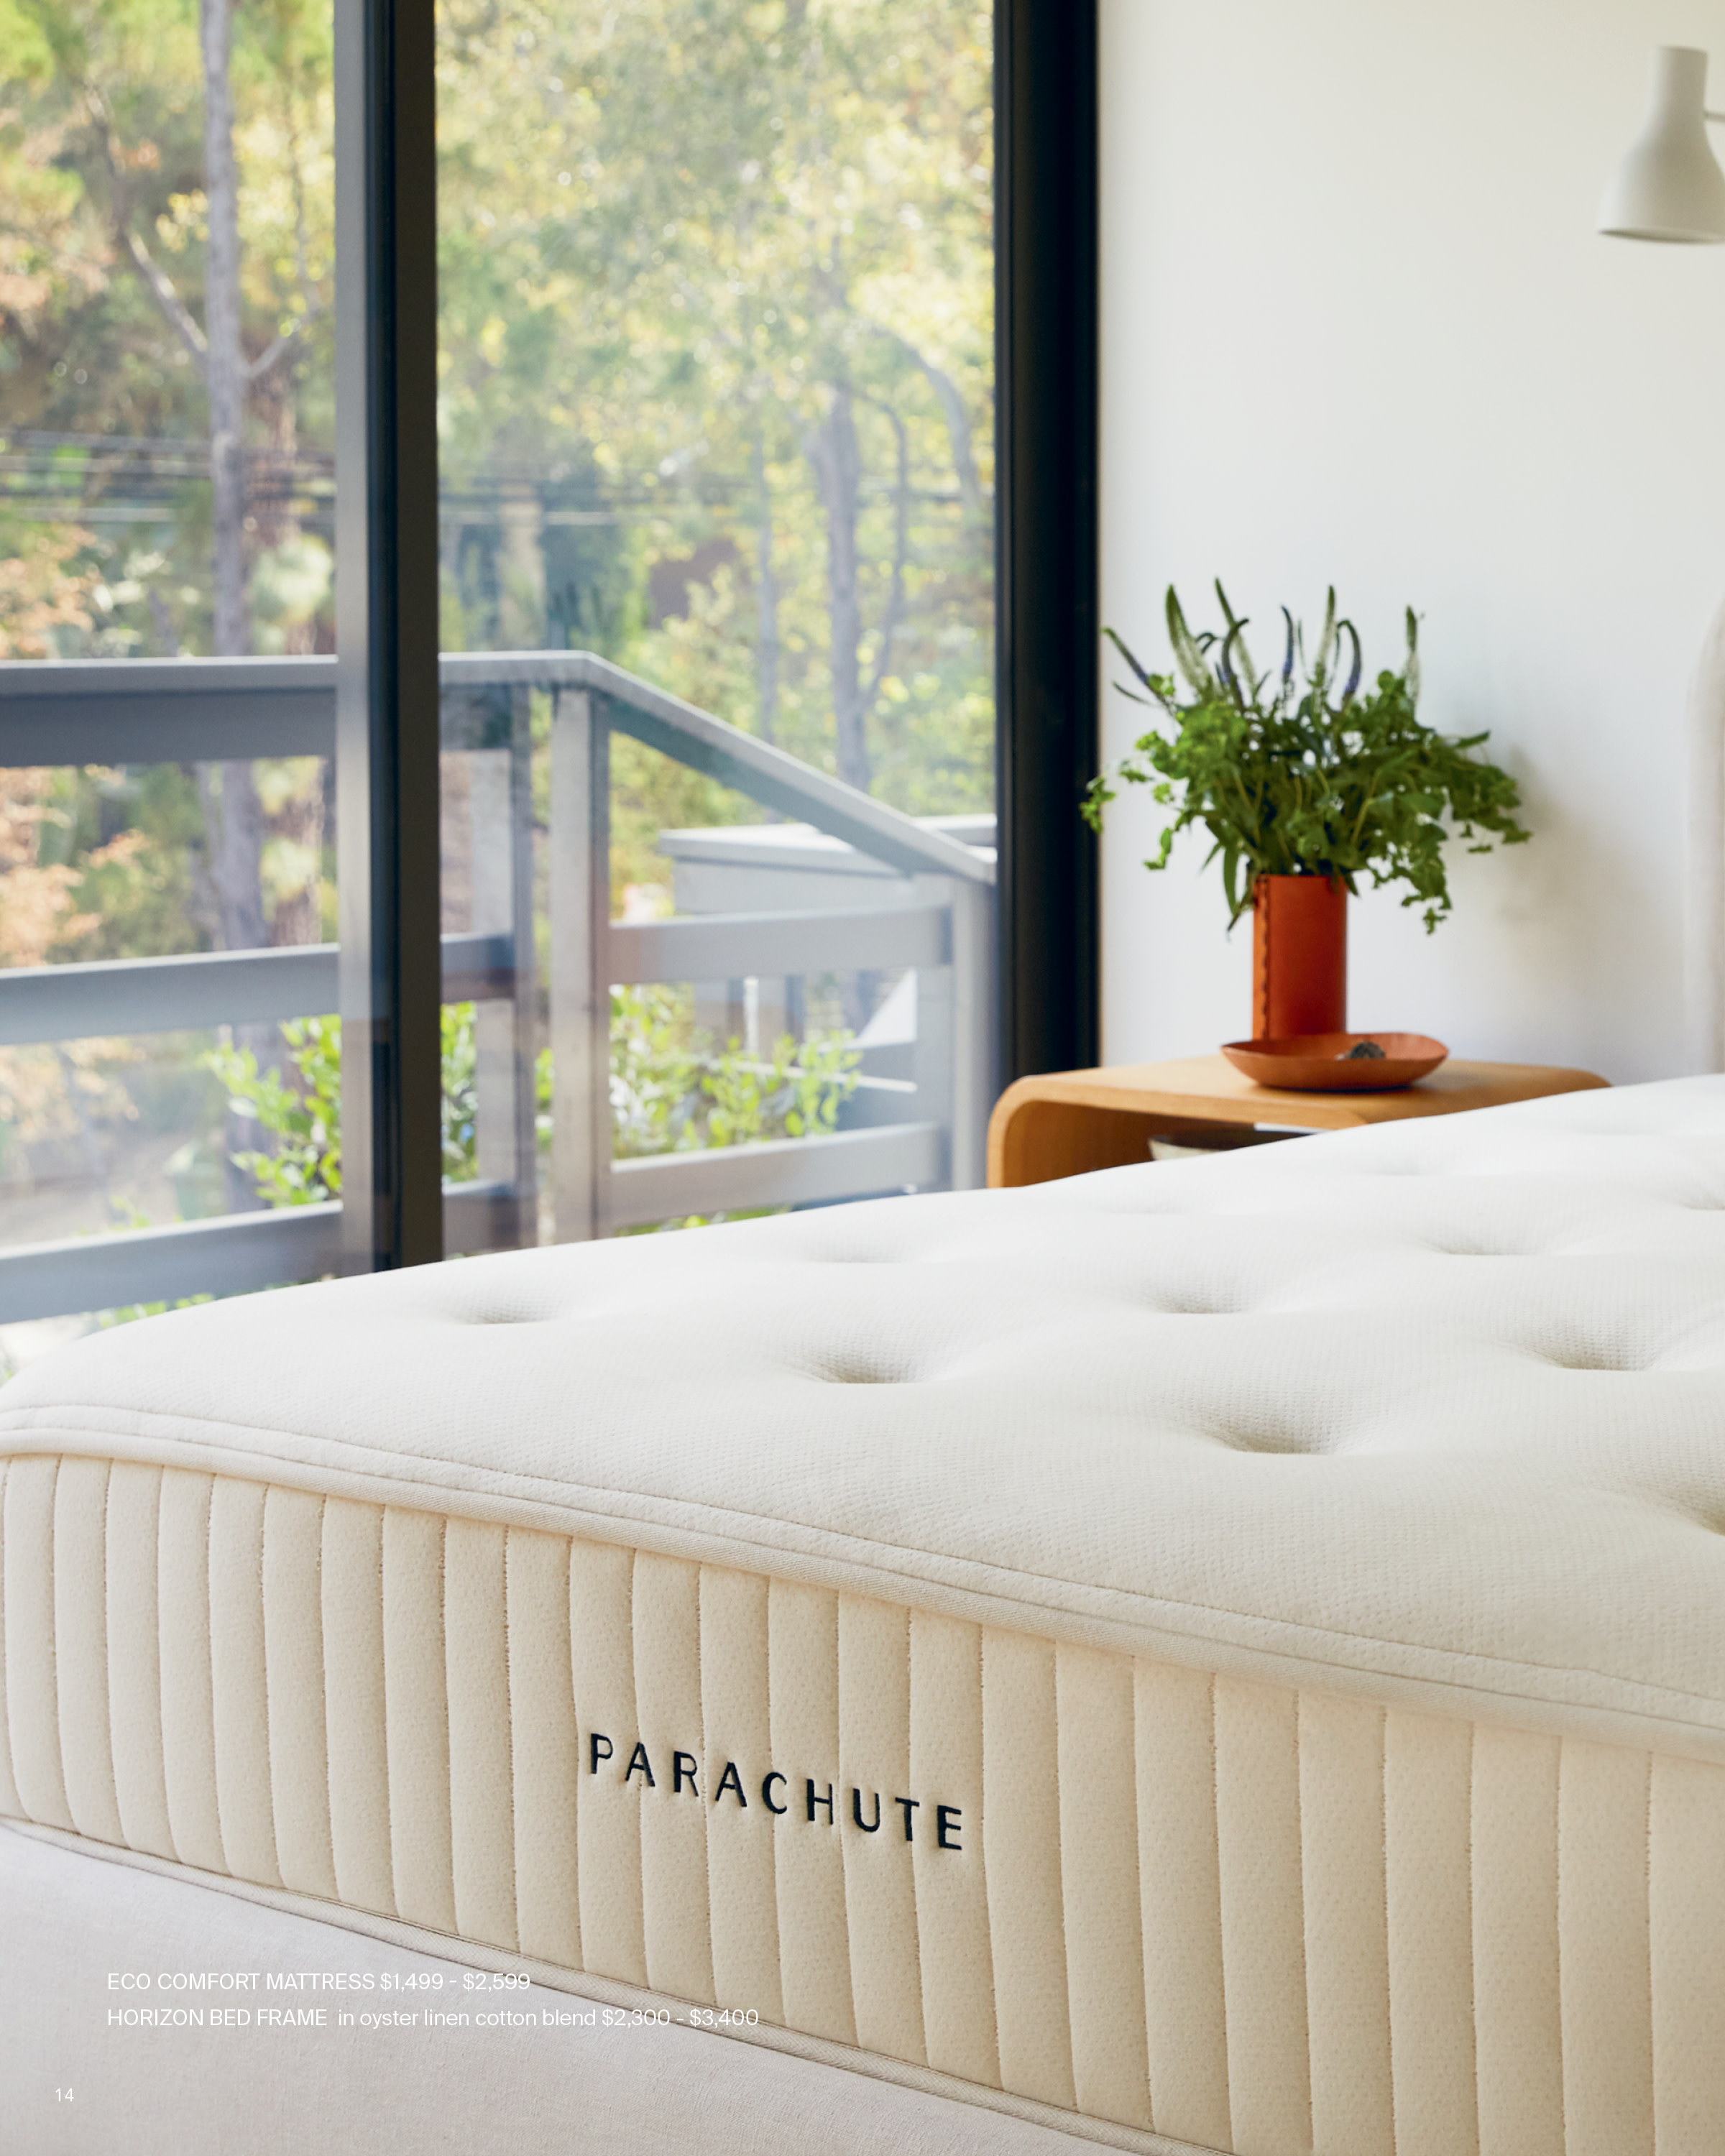 The Parachute mattress in a naturally lit bedroom.